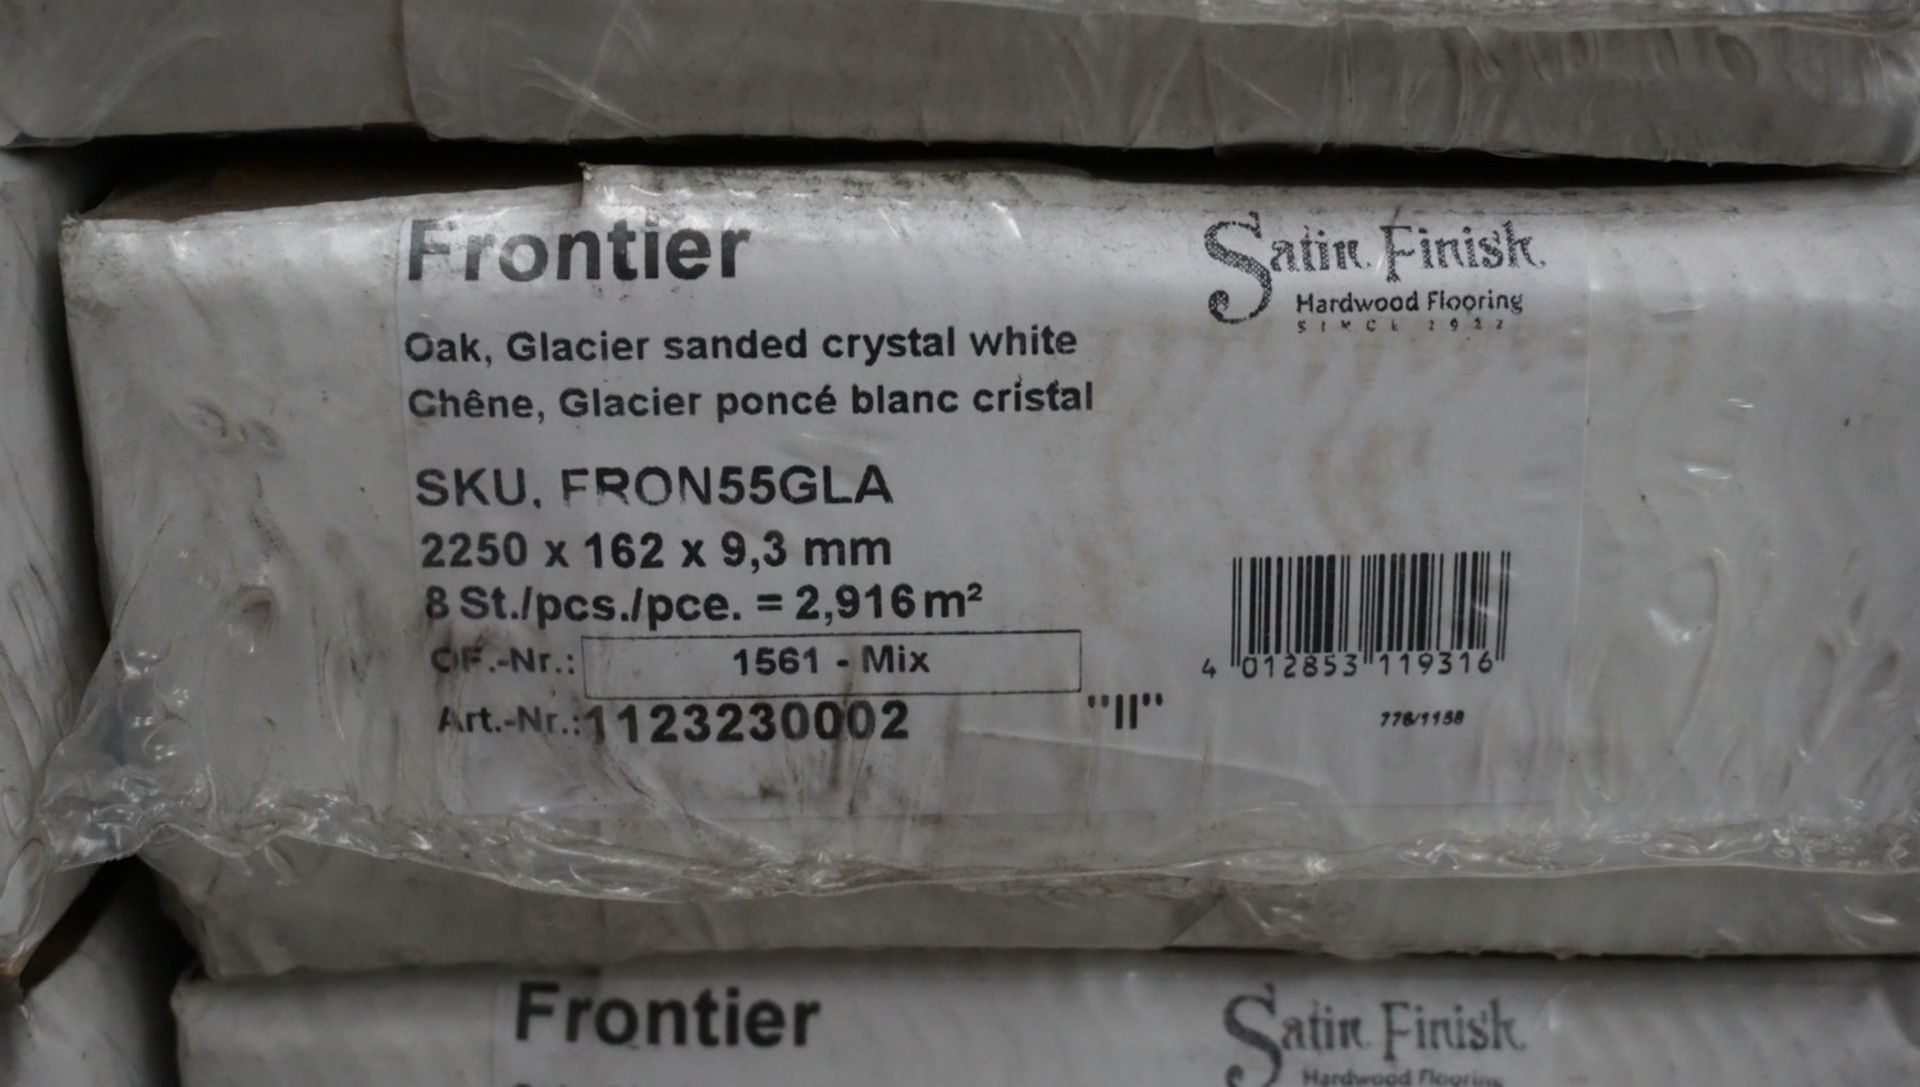 BOXES - SATIN FINISH FRONTIER GLACIER SANDED CRYSTAL WHITE 2260 X 162 X 9.3MM ENGINEERED HARDWOOD ( - Image 3 of 3